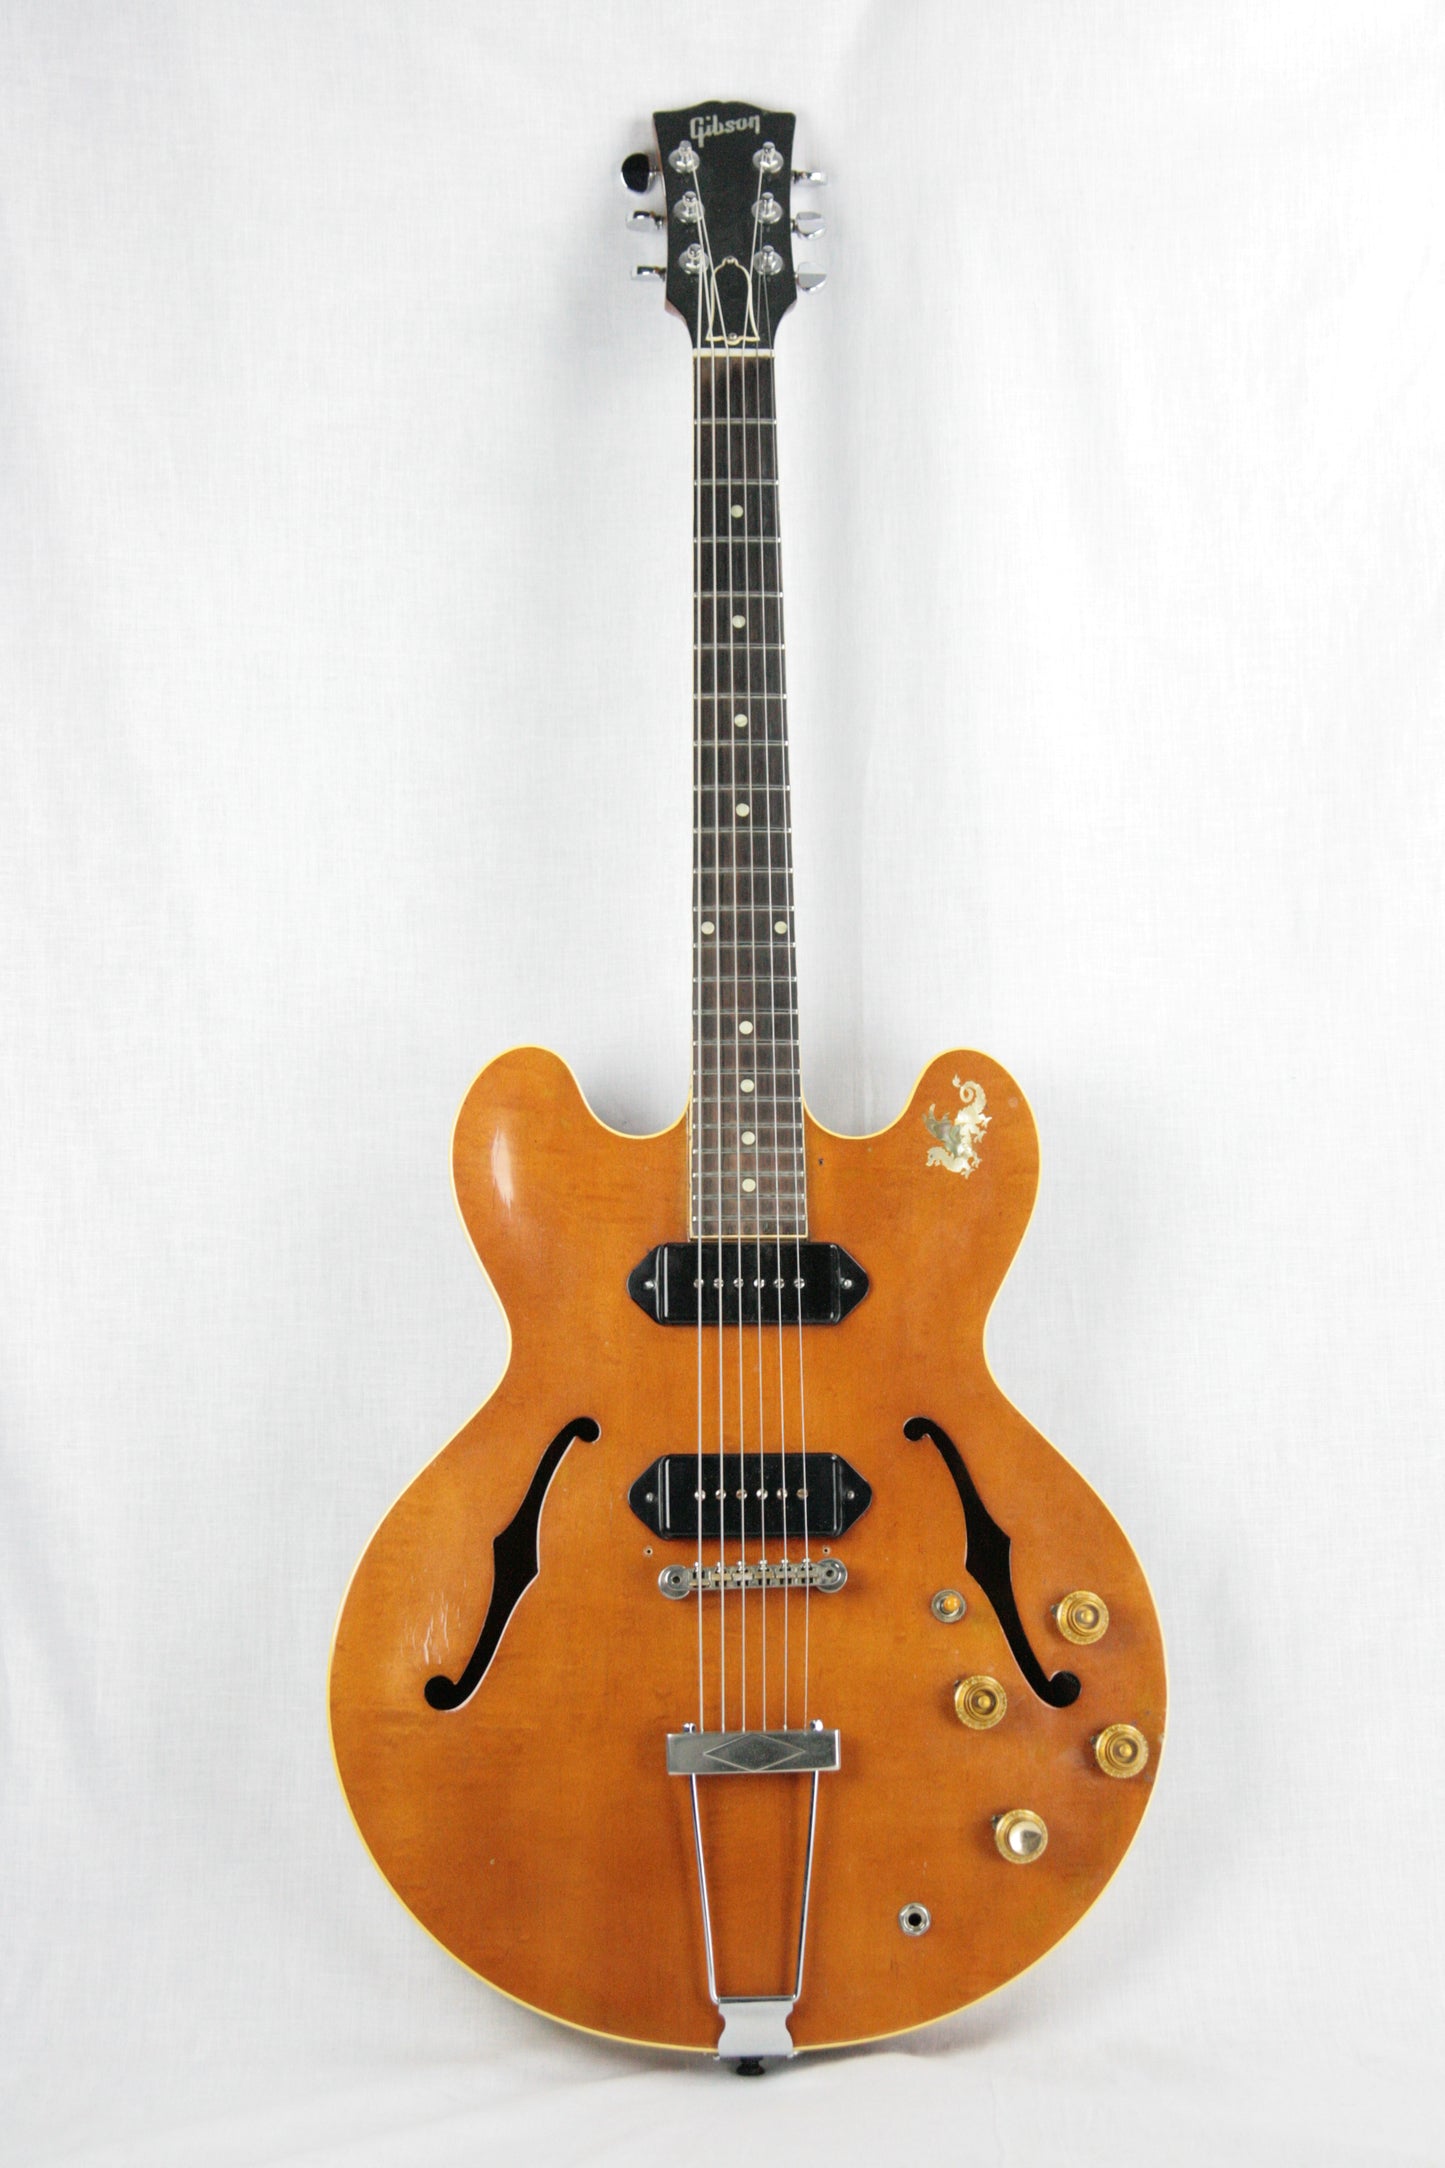 1959 Gibson ES-330 TD Thinline Electric Guitar Player-Grade! 2 P90's Sound Great! 225 335